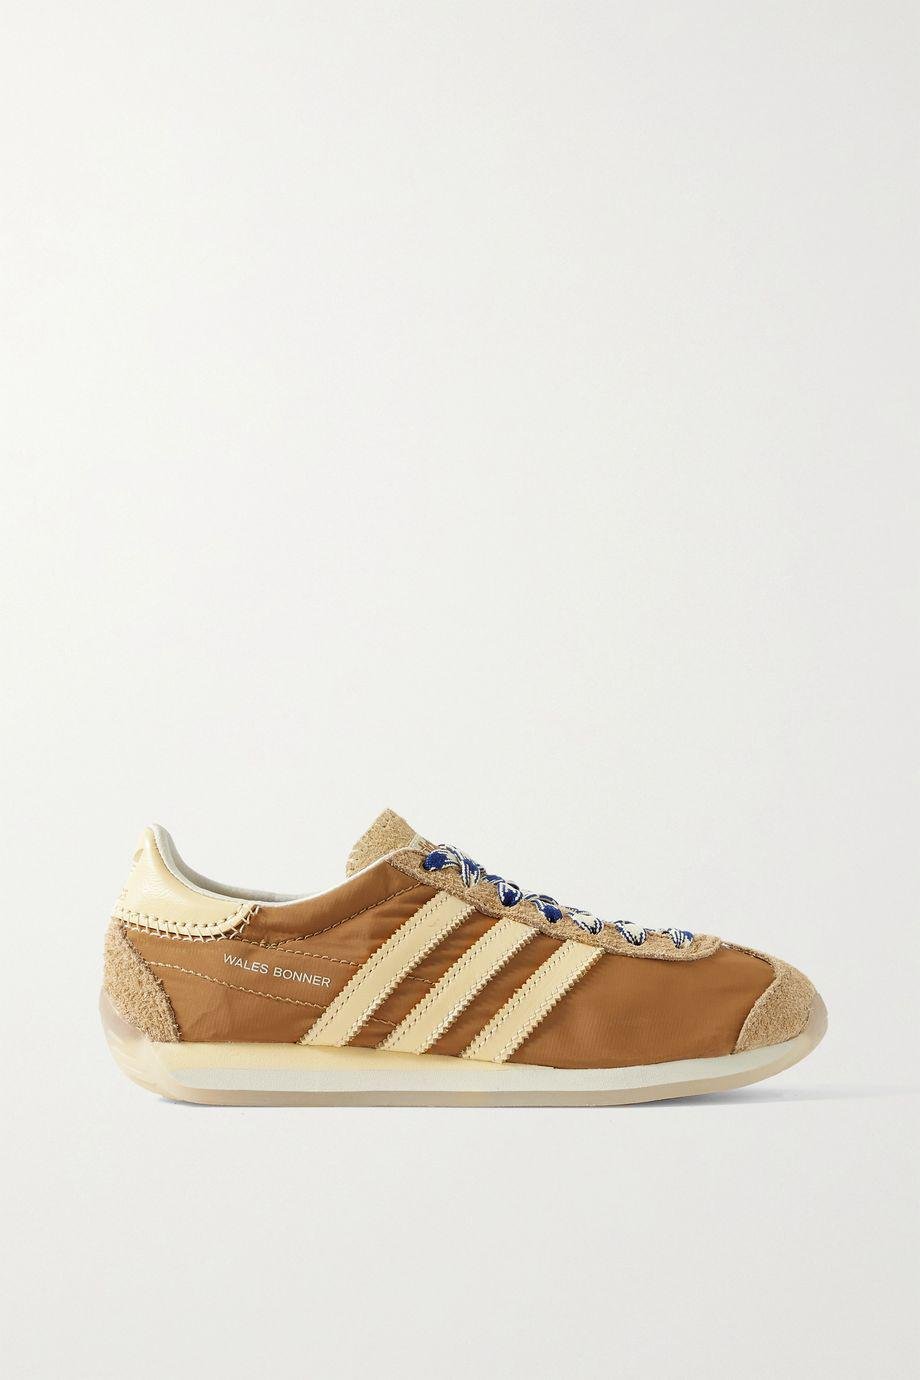 + Wales Bonner suede and leather-trimmed shell sneakers by ADIDAS